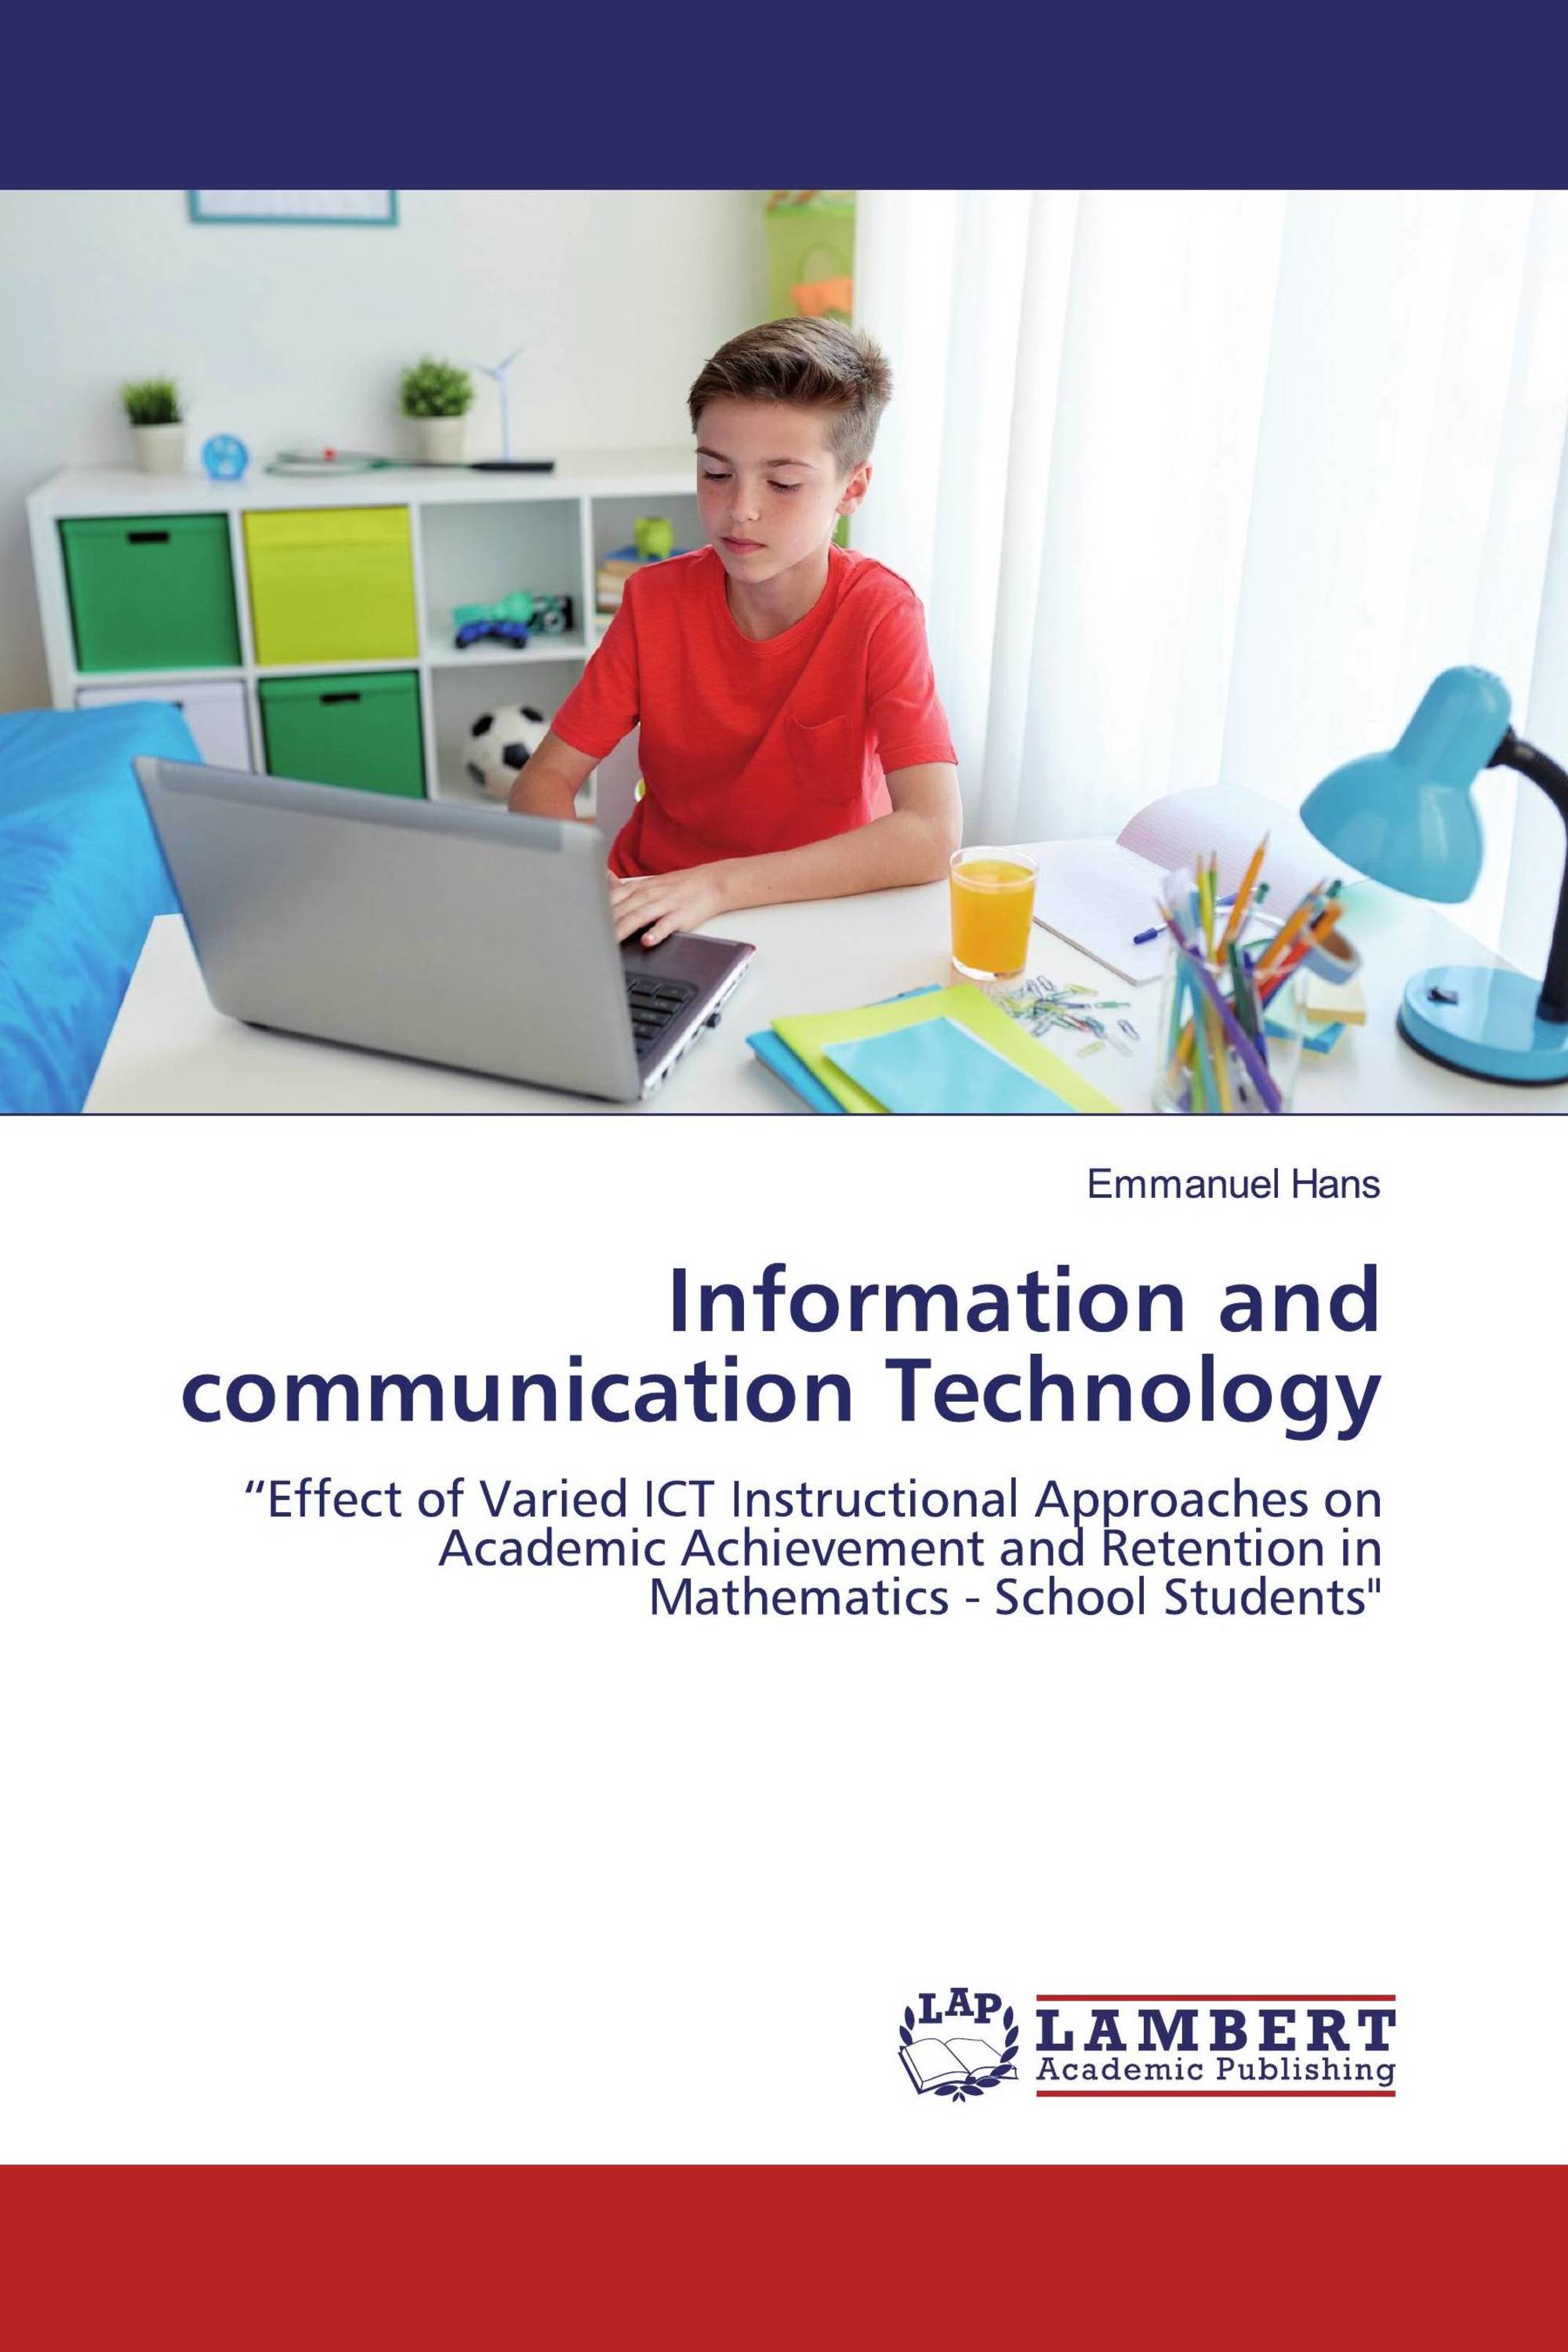 literature review on information and communication technology